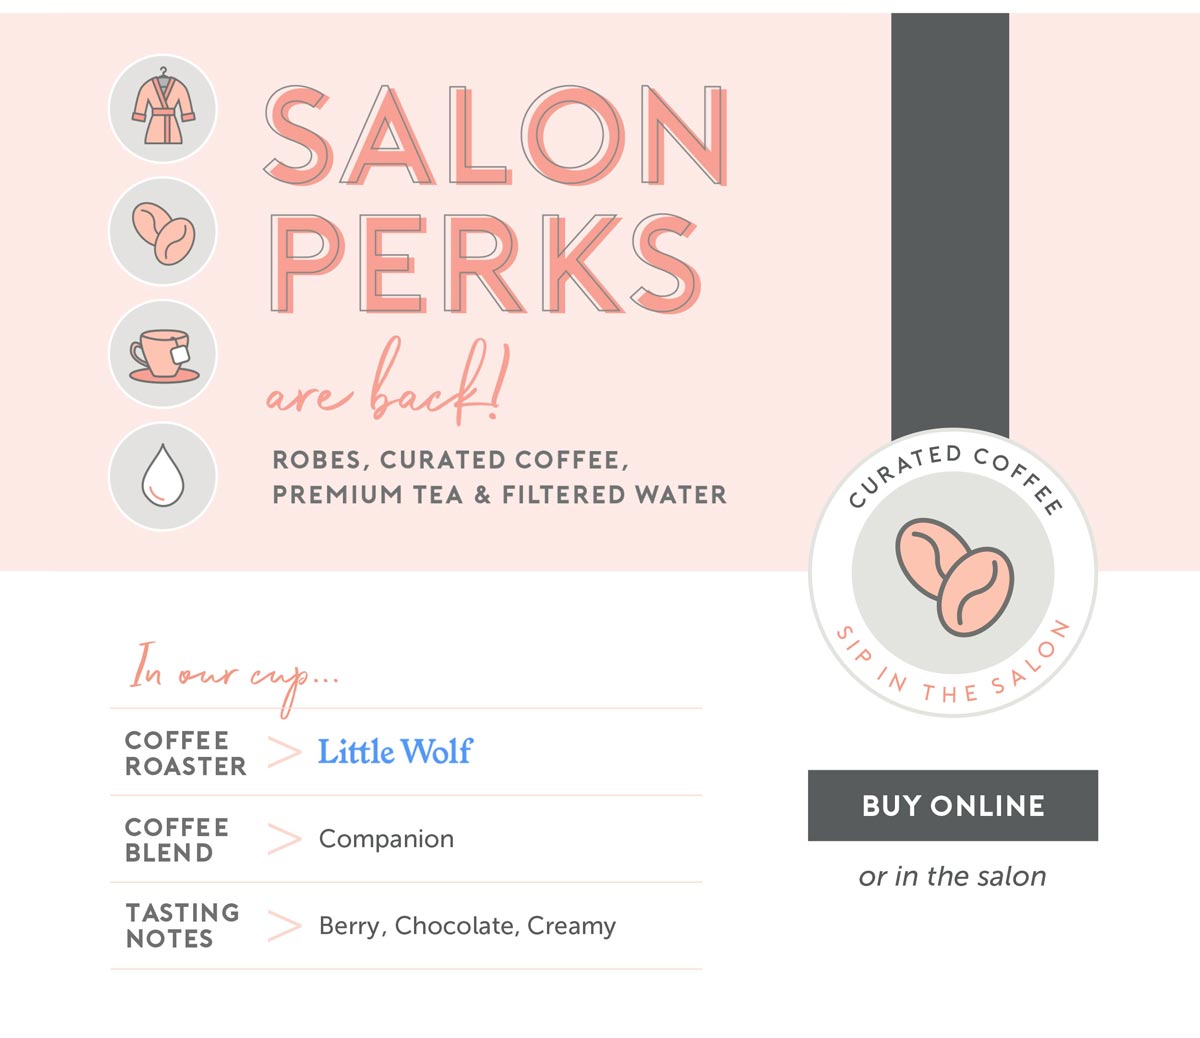 Salon Perks are Back! Robes, curated coffee, premium tea and filtered water. Curated Coffee in our cup - roaster: Little Wolf, Blend: Companion, Tasting Notes: Berry, Chocolate, Creamy - Click to buy online! (or stop by the salon to buy in person)